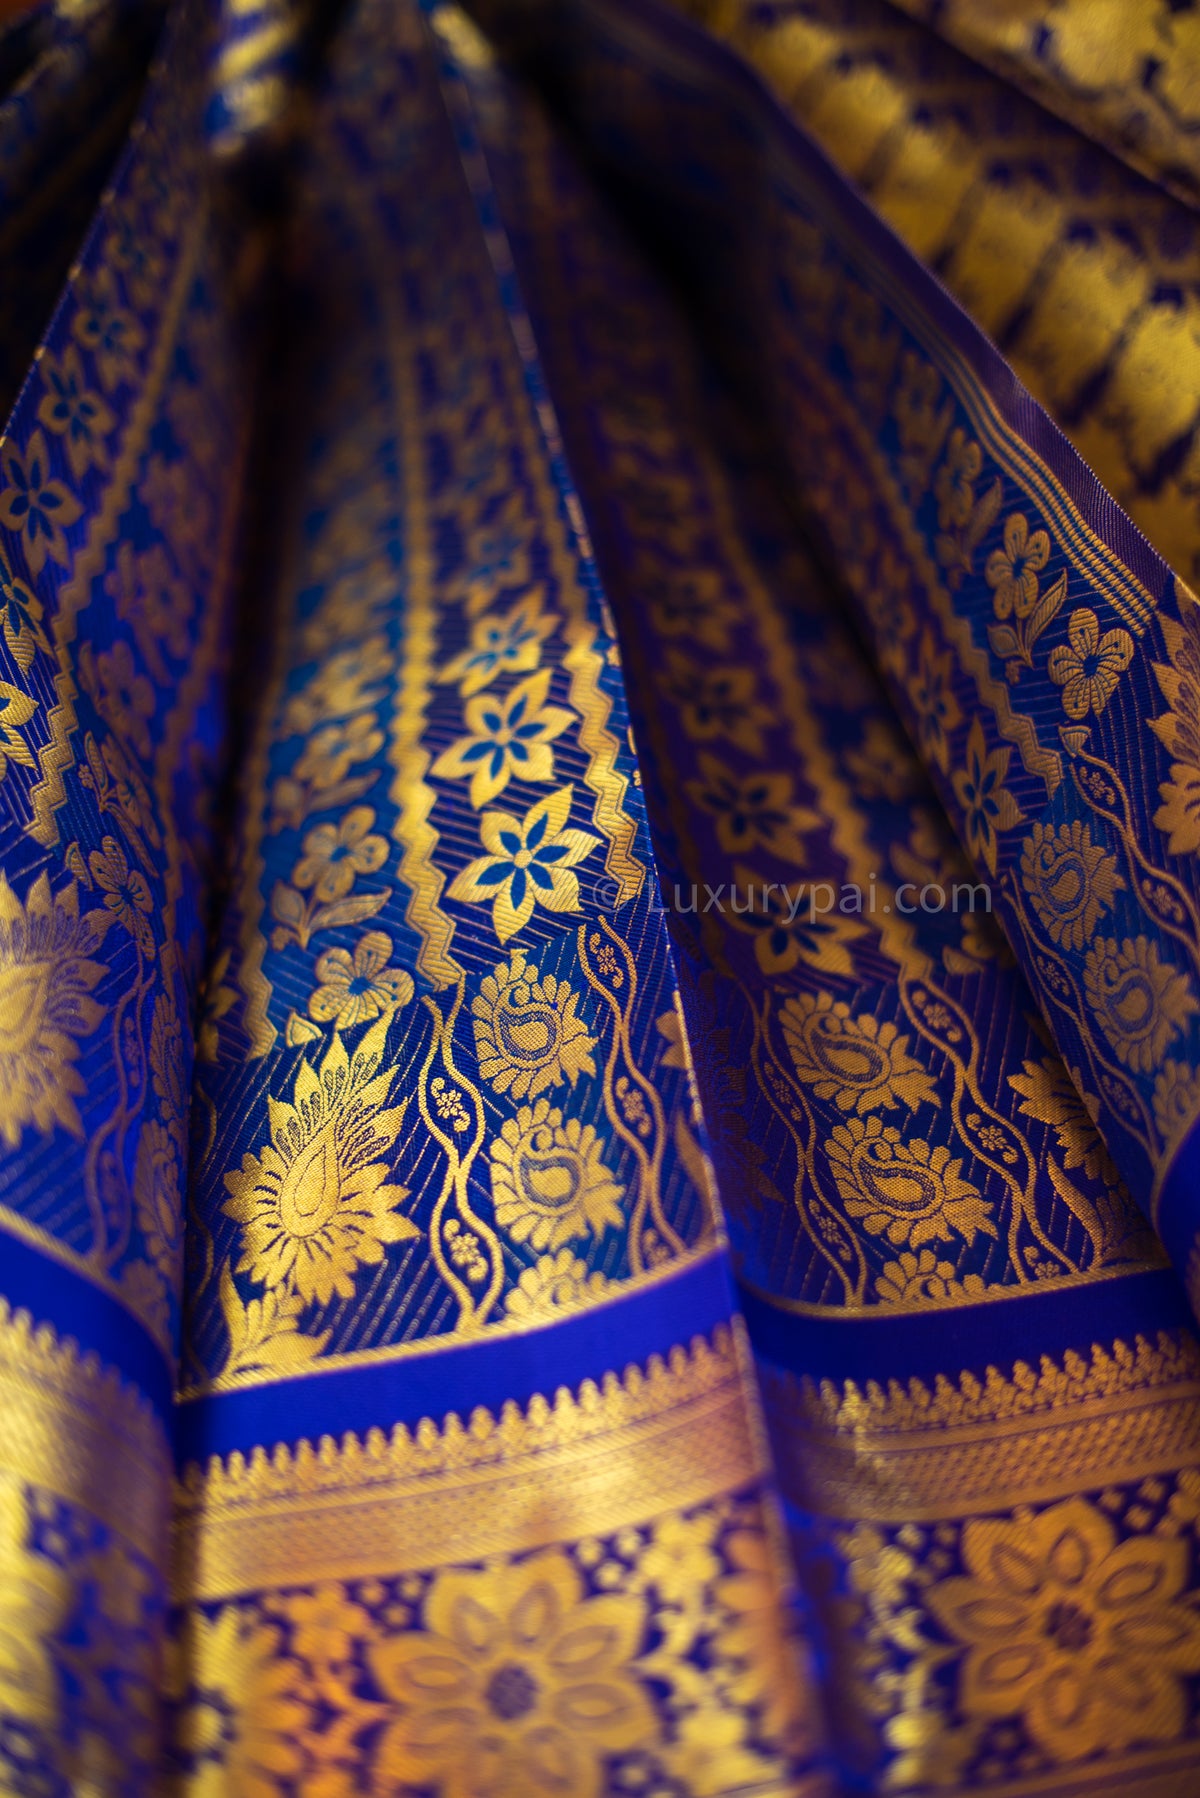 Stunning Violet Kanchipuram Pattu Saree with Floral and Chain Design - A Luxurious and Elegant Piece for Any Occasion